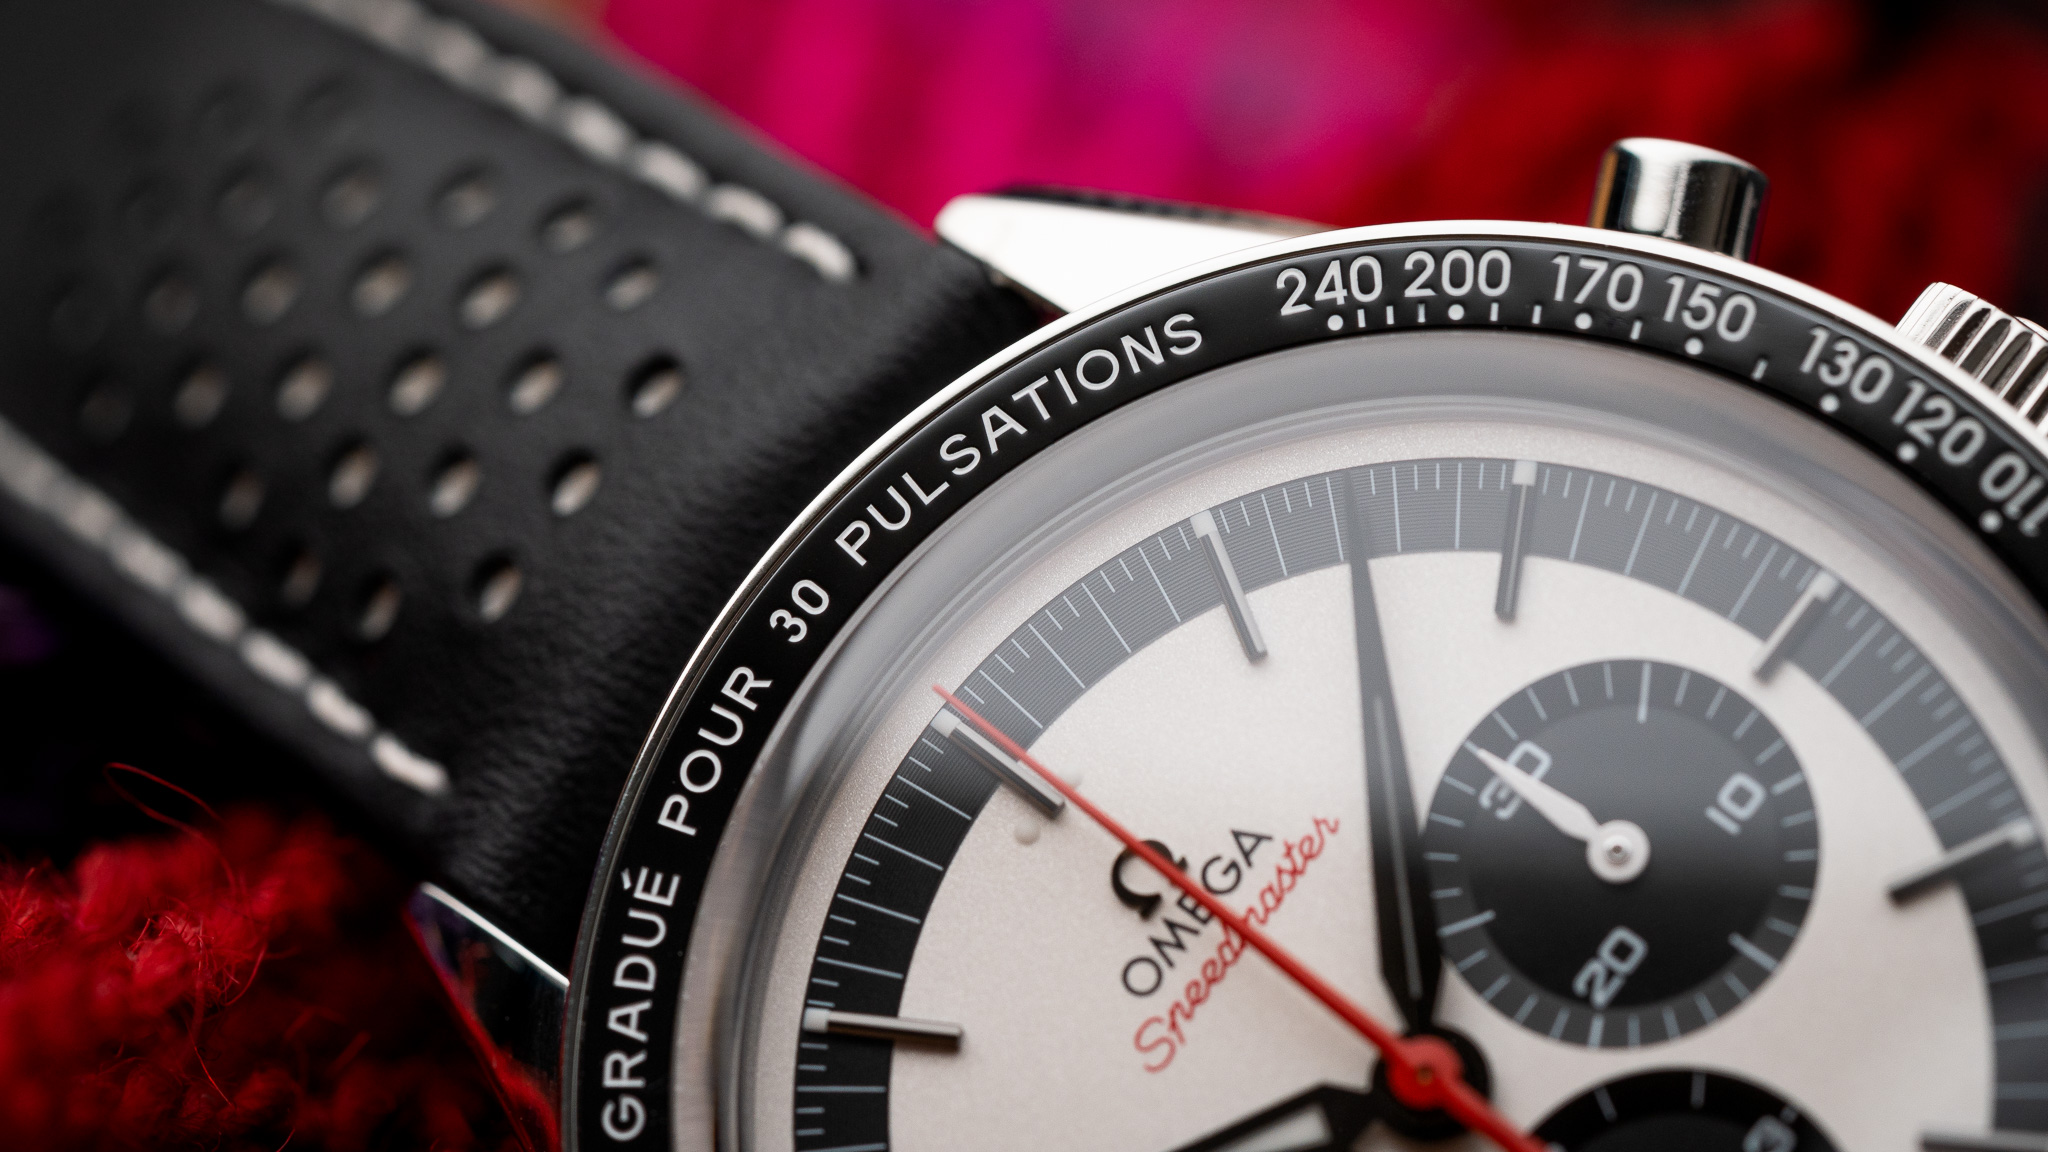 The Time Bum - Exploring the world of watches on a budget